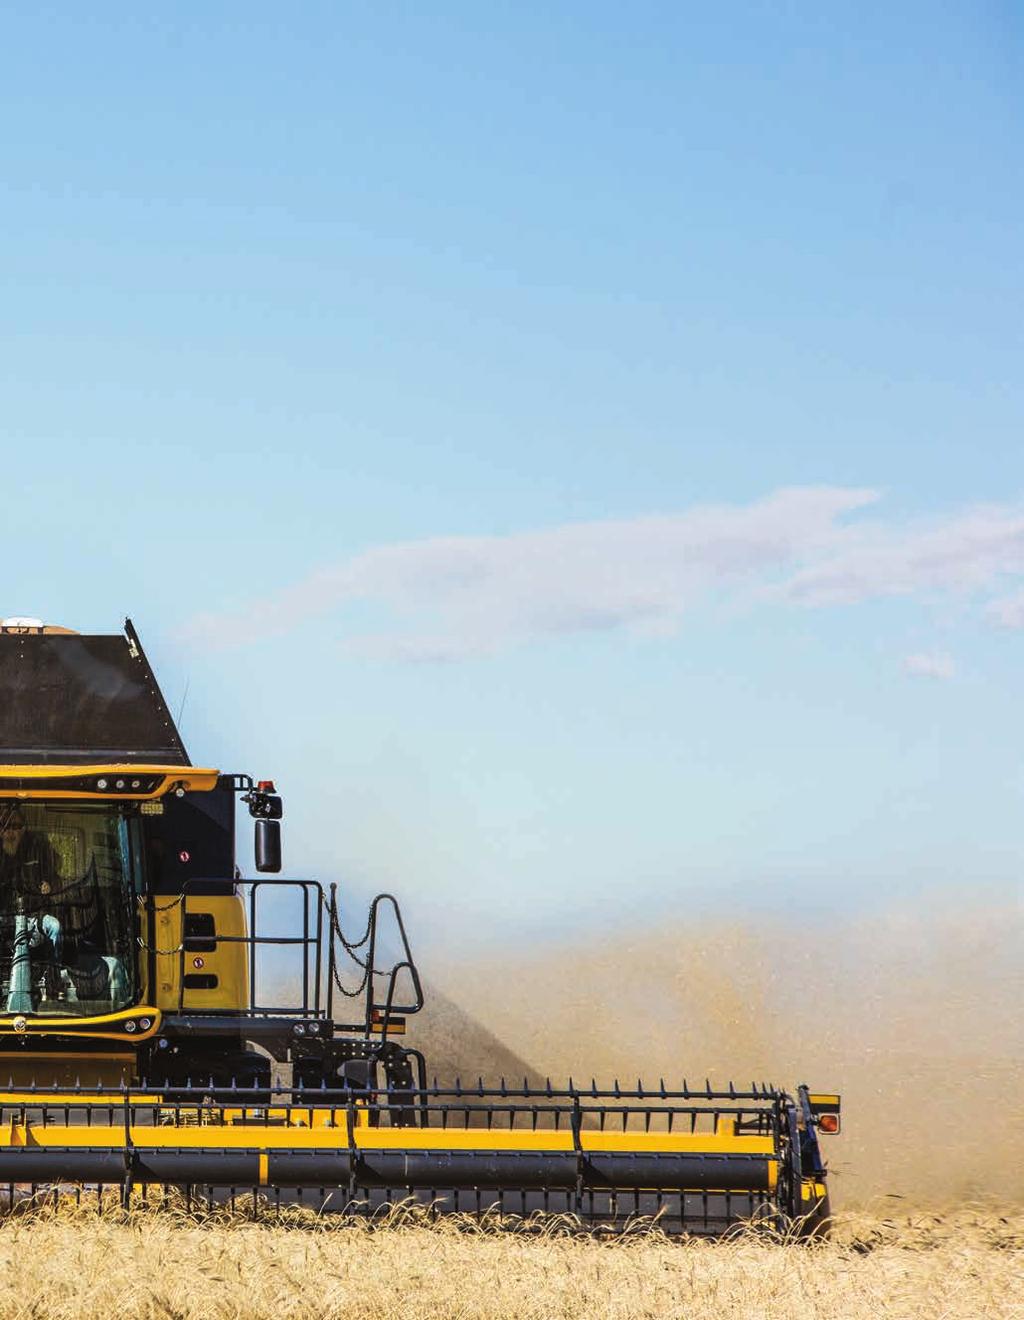 720CG HIGH-CAPACITY GRAIN HEADERS In conventional farming situations, the traditional high-capacity grain headers are